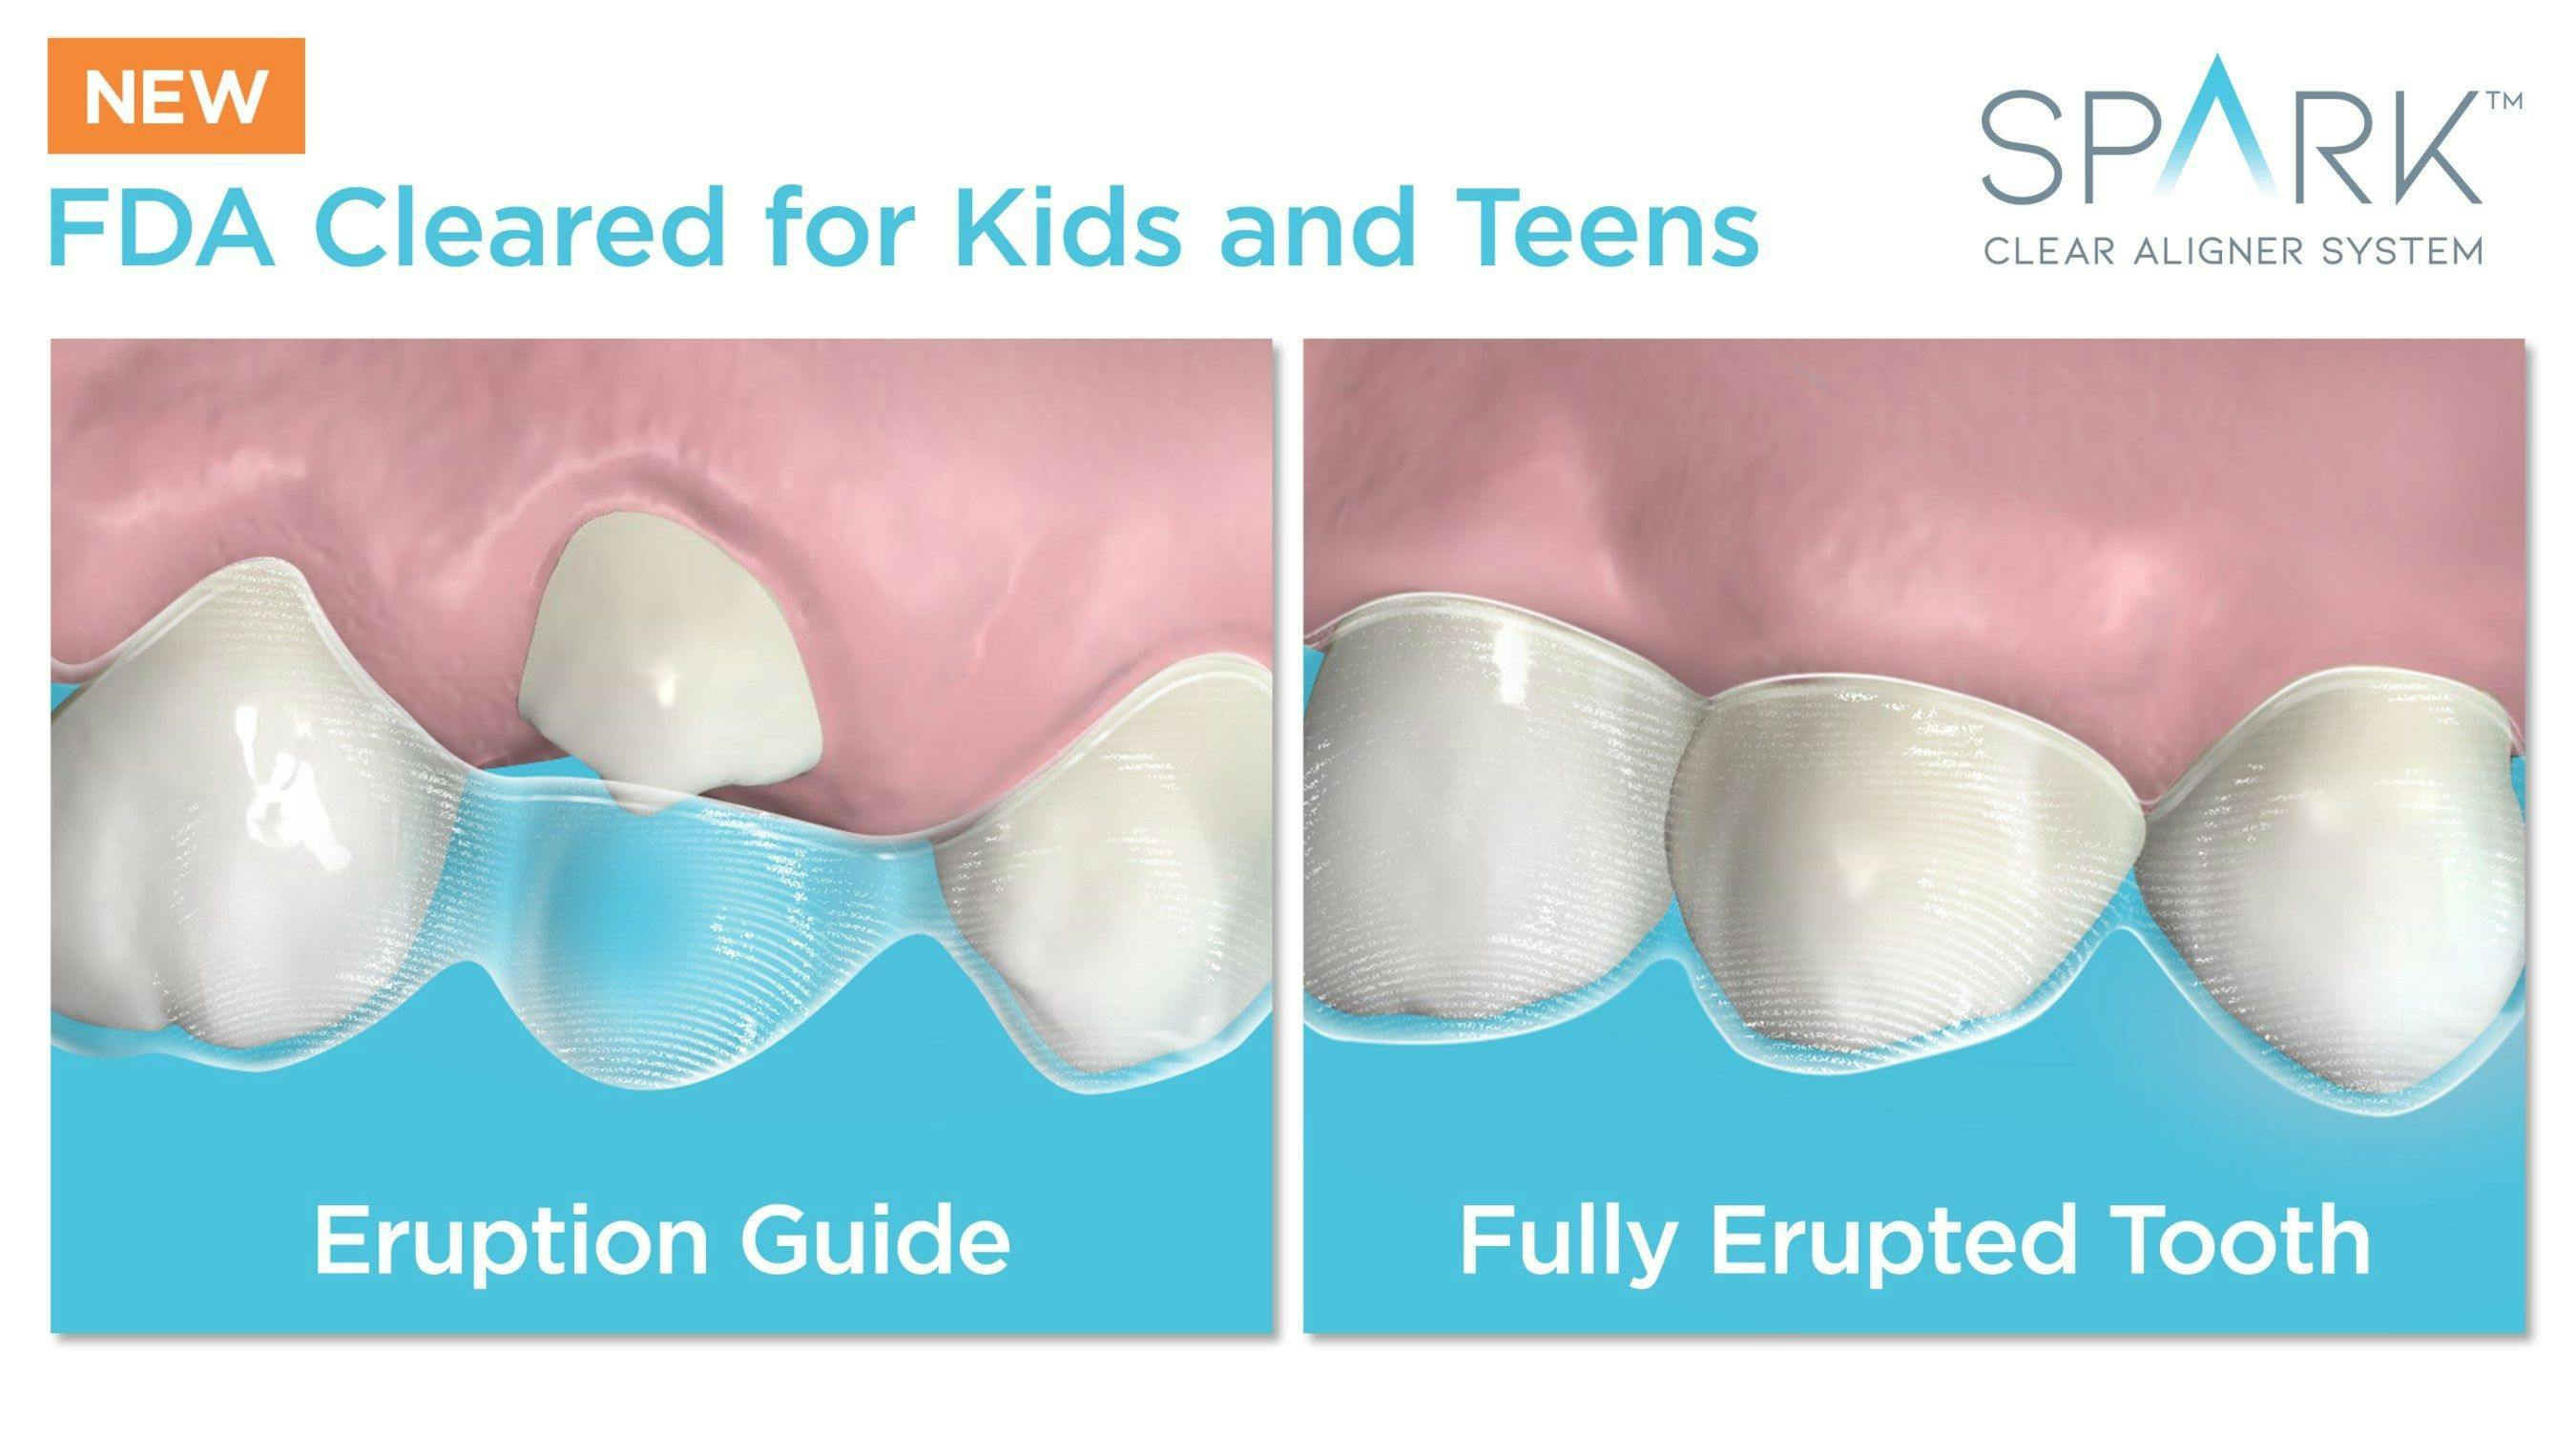 Spark Clear Aligner System Receives FDA Clearance for Younger Patients